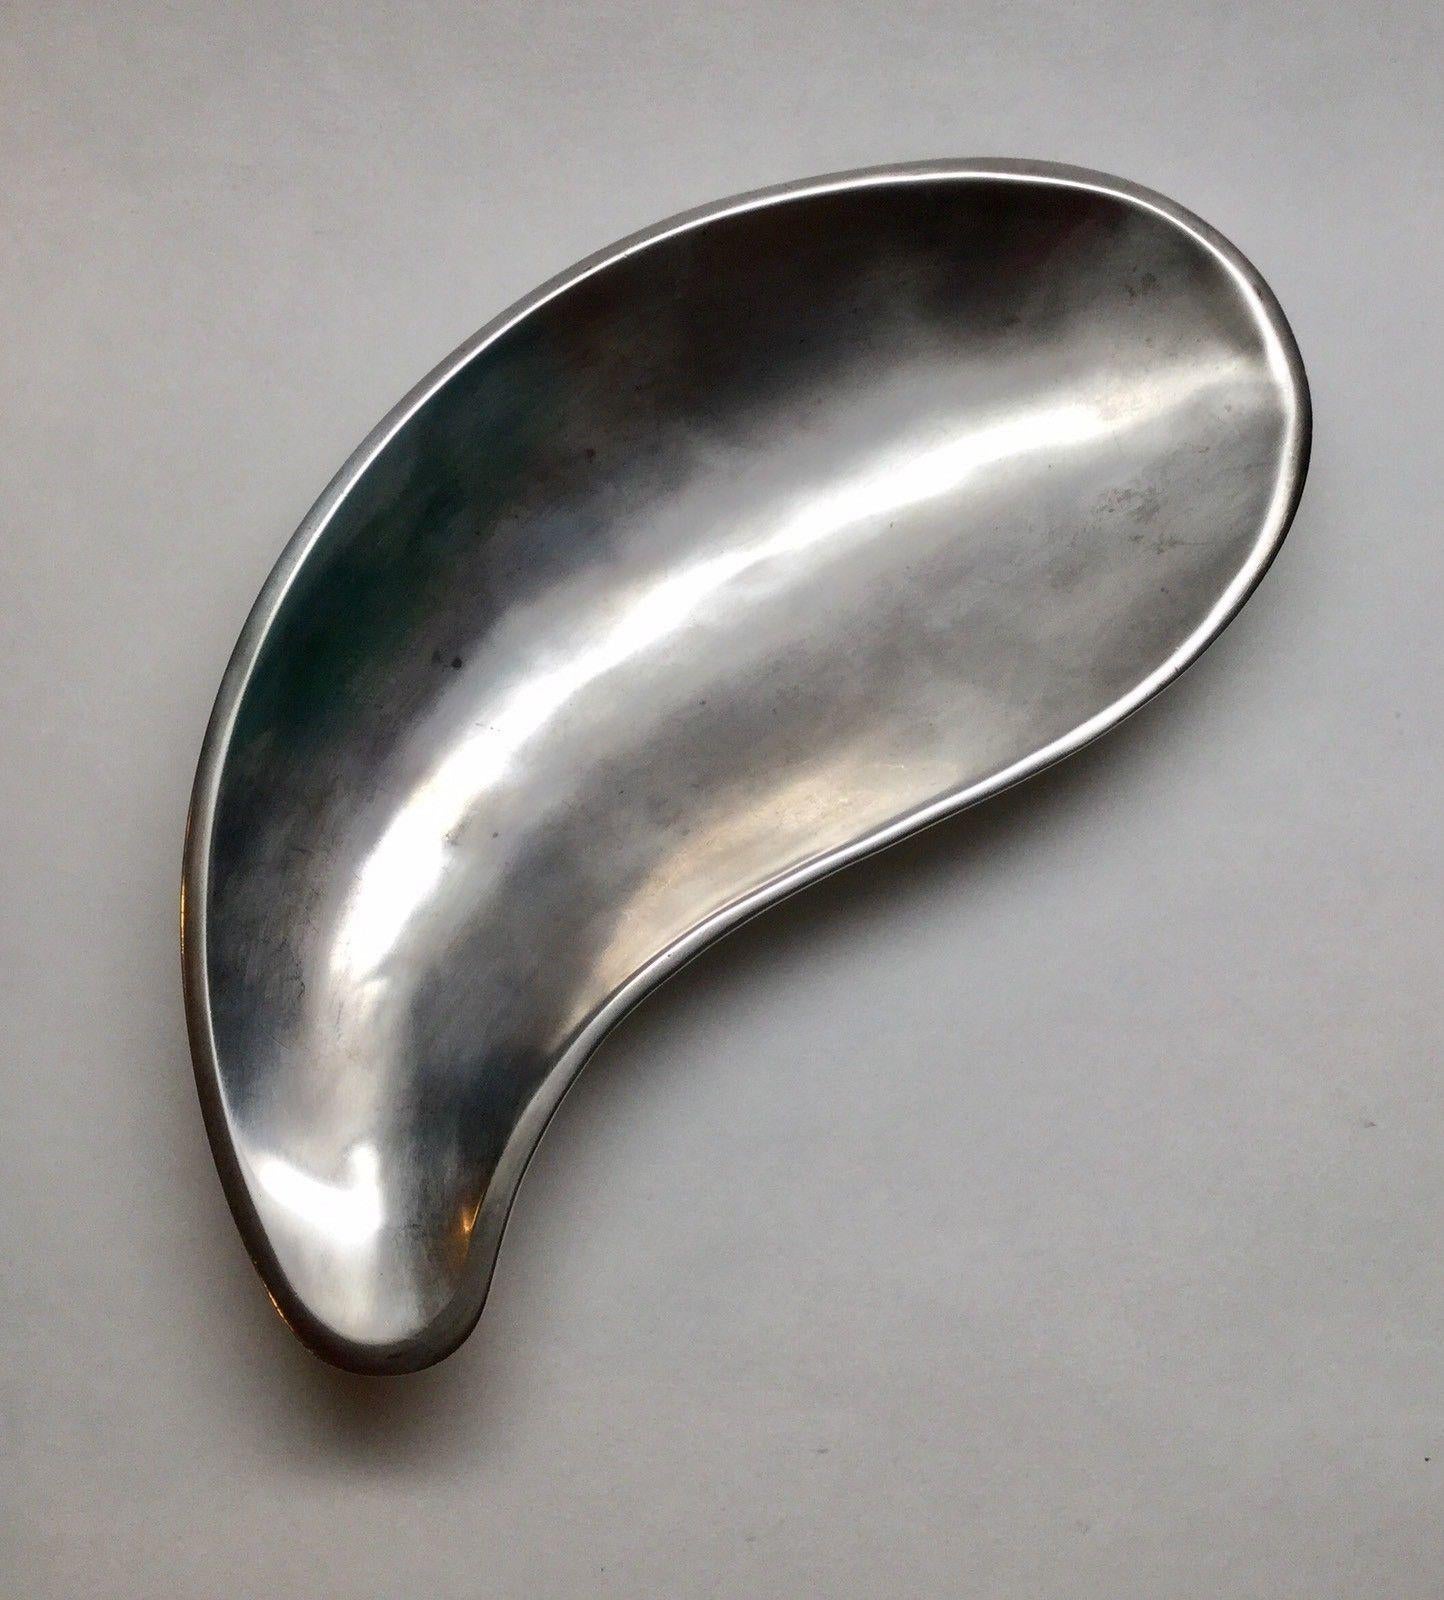 P. Lopez G Mexico sterling silver contemporary paisley shape footed dish. 
Marked: MADE IN MEXICO, STERLING 0.925, 
P.LOPEZ G (G is worn). 
Measures: 8 1/2